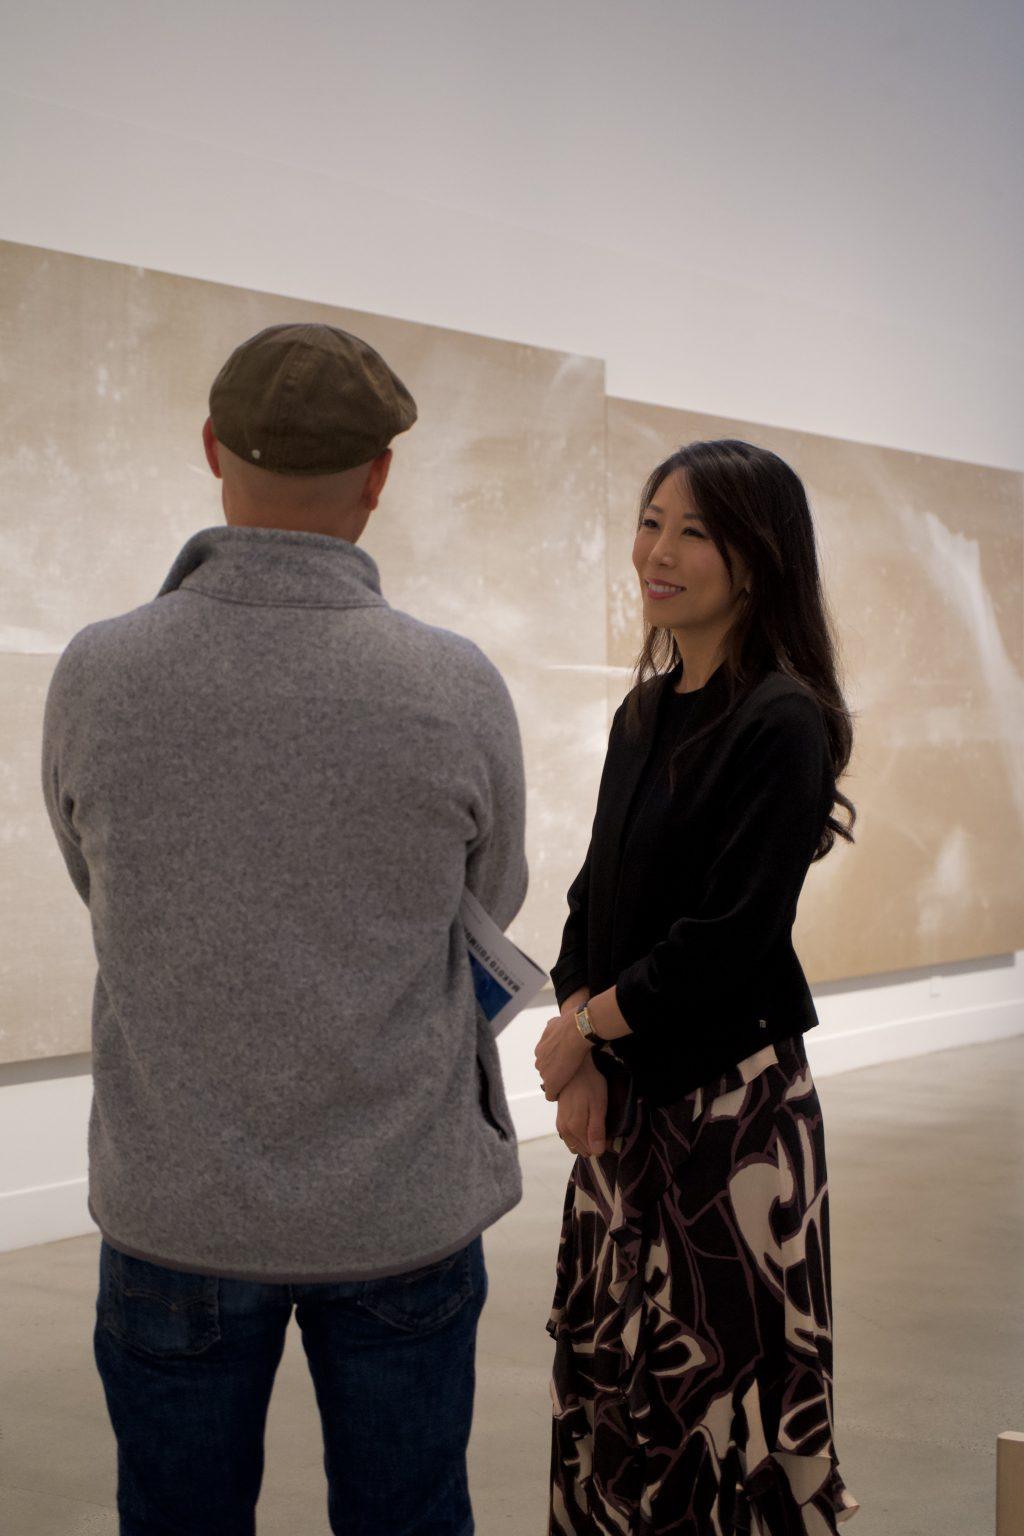 Haejin Fujimura speaks with an observer in front of "Sea Beyond" in the Weisman Museum on Jan. 20. She founded Embers International, an international program and advocacy agency — fighting exploitation, and human trafficking in India, according to the their website.